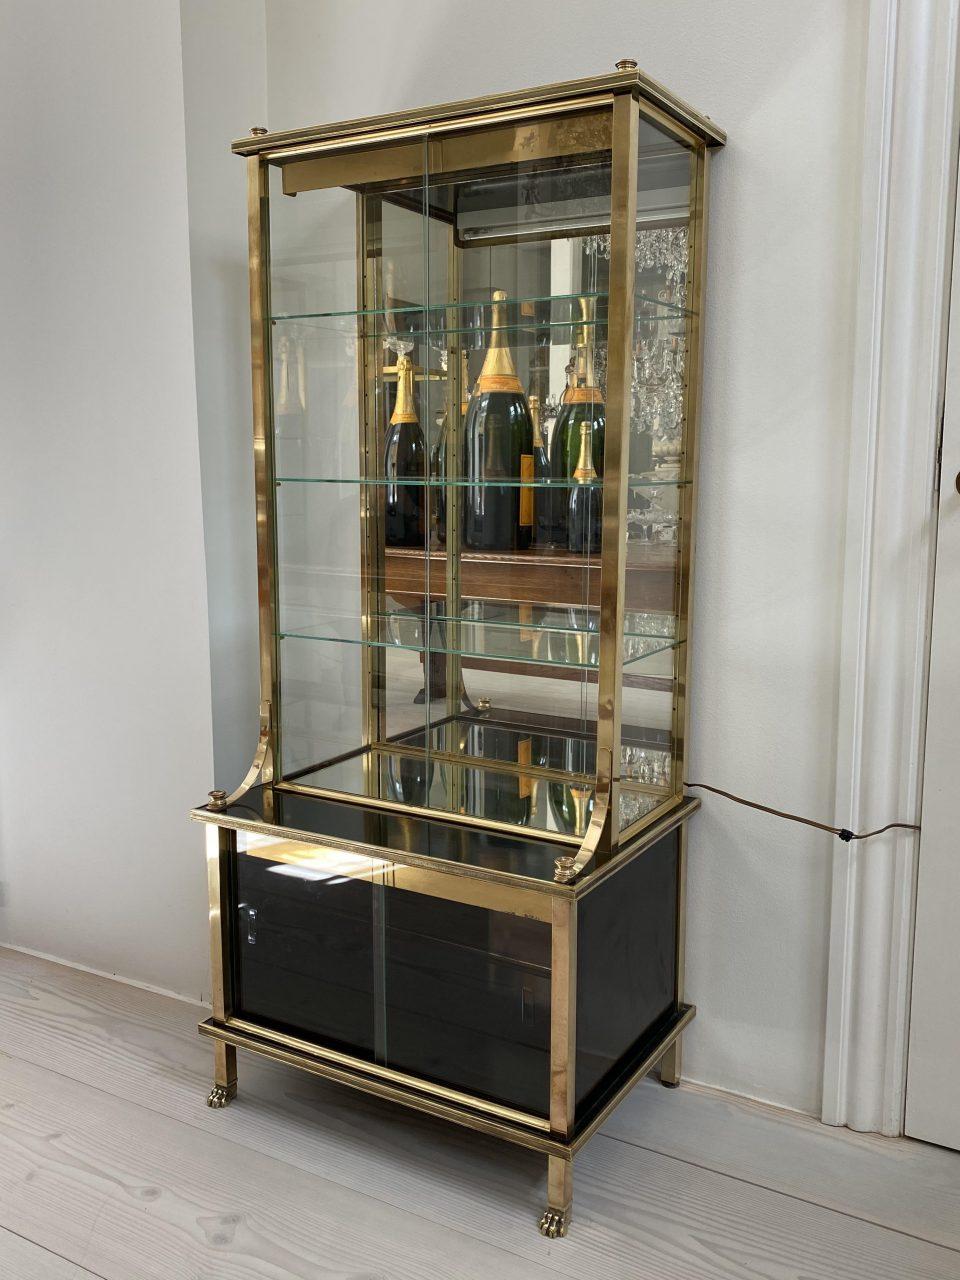 Handsome and striking vintage showcase, in the most beautiful condition with fine brass detailing – a little nod to Maison Jansen’s style. The gorgeous cabinet consists of an upper display section with sliding doors. Behind the sliding doors there